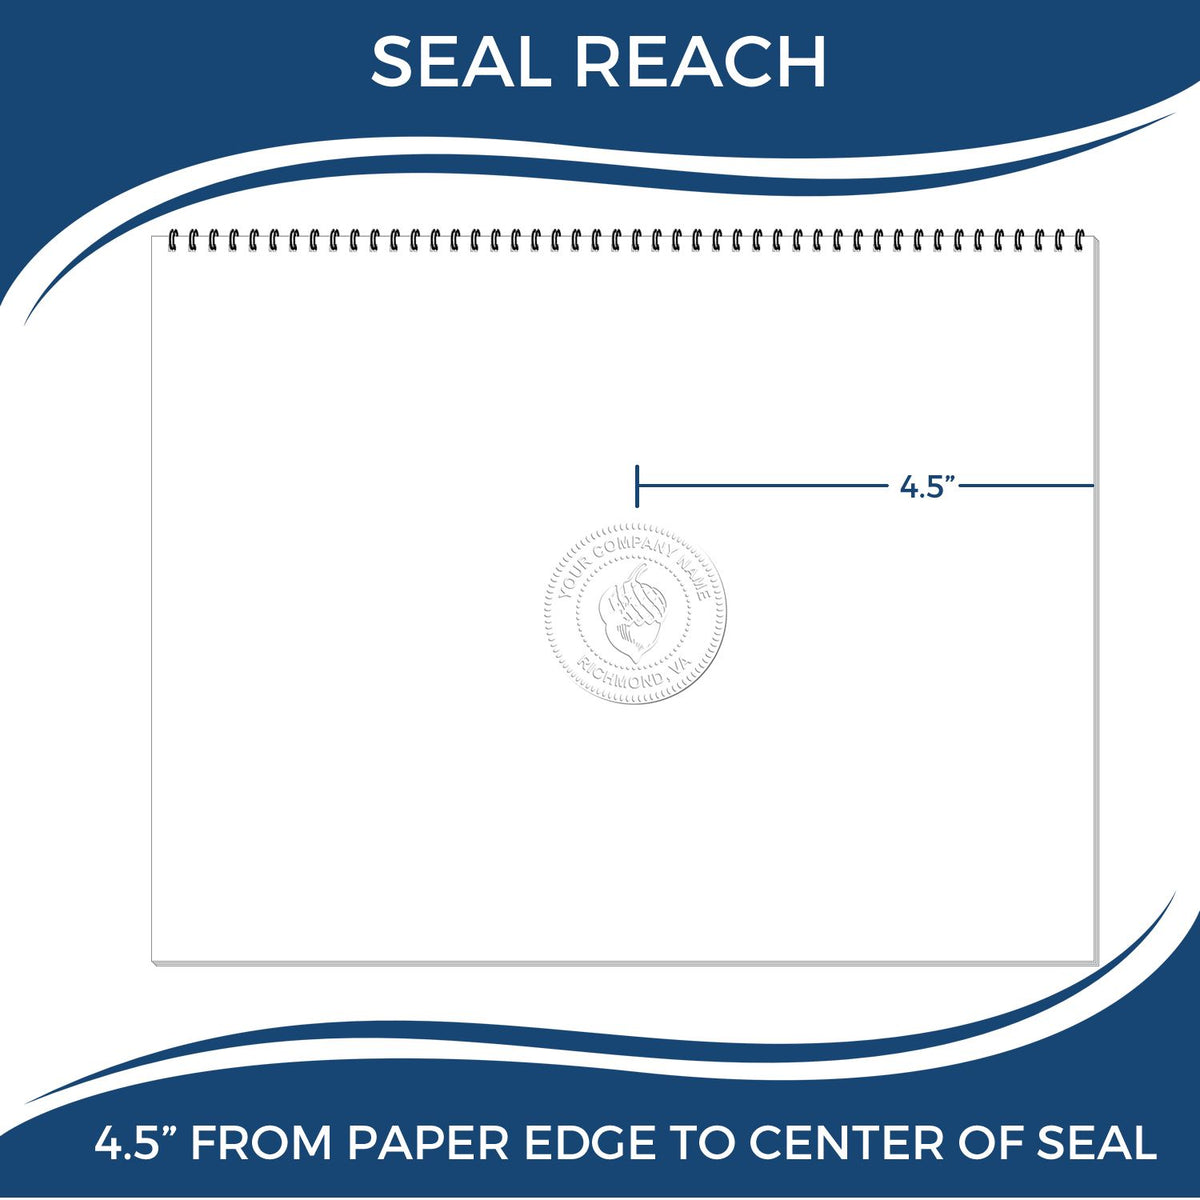 An infographic showing the seal reach which is represented by a ruler and a miniature seal image of the Extended Long Reach Texas Architect Seal Embosser